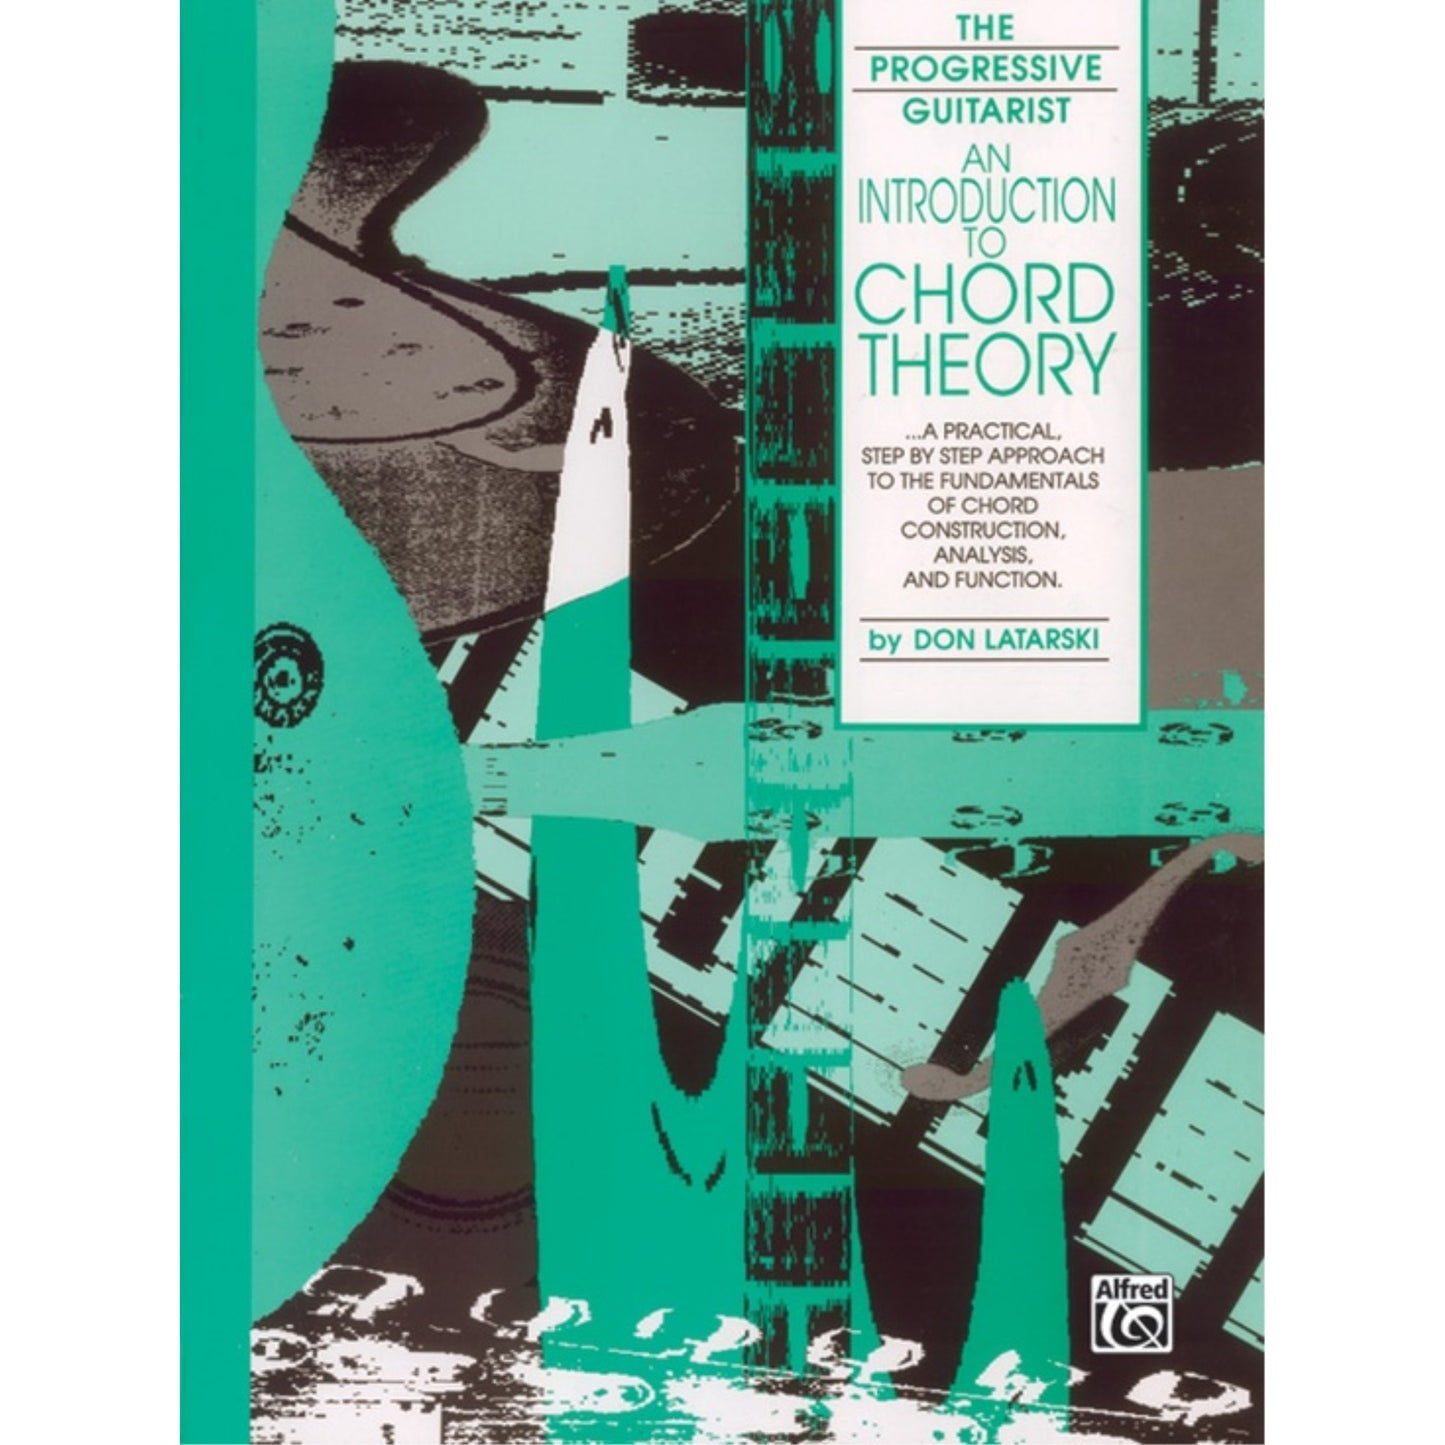 An Introduction to Chord Theory - Don Latarski